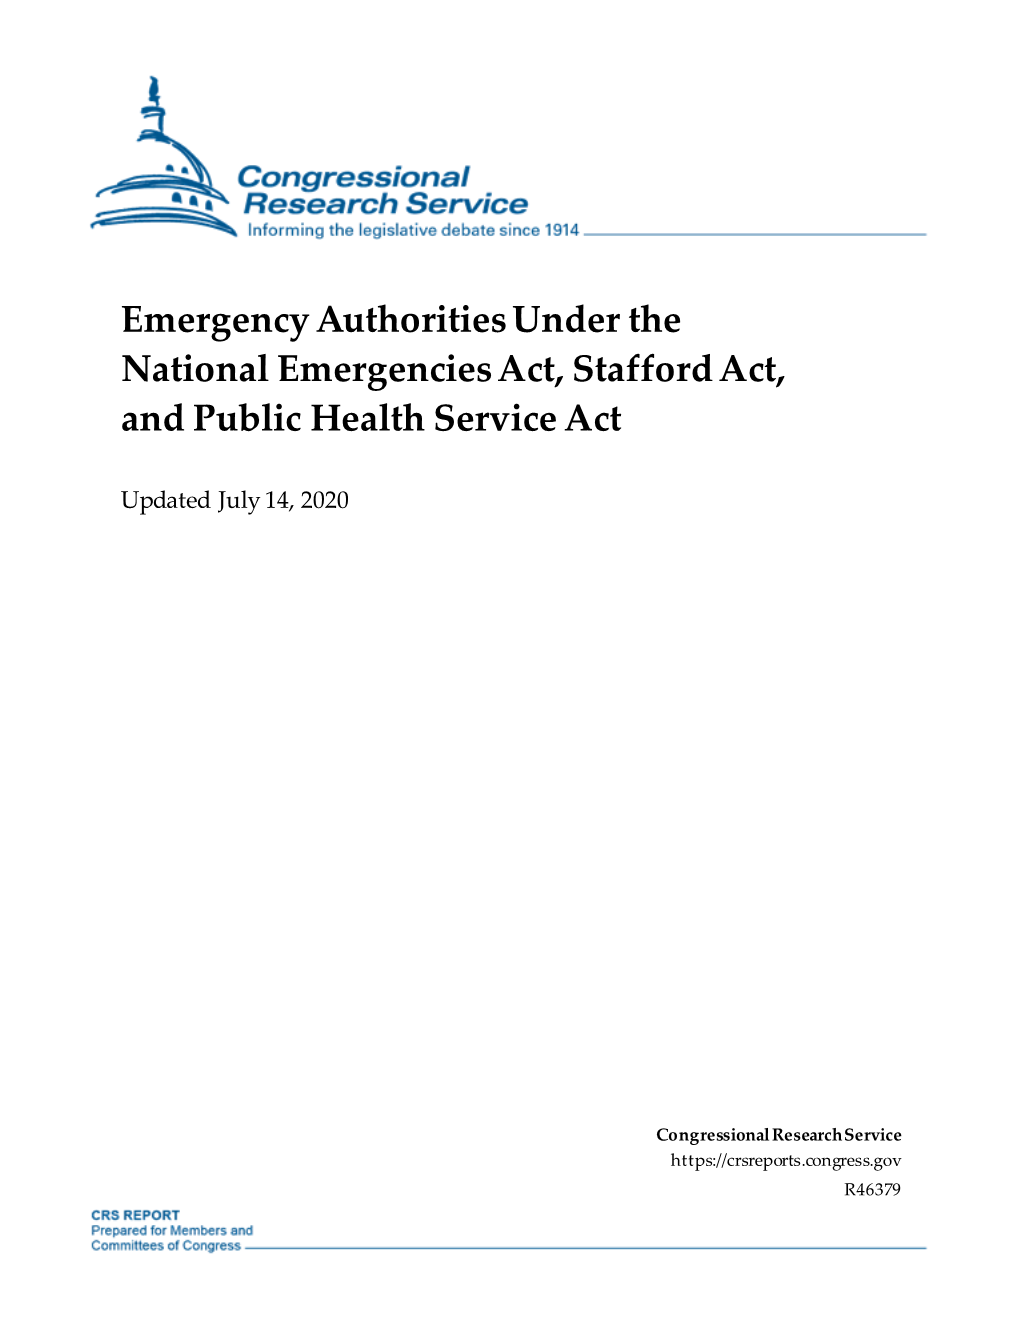 Emergency Authorities Under the National Emergencies Act, Stafford Act, and Public Health Service Act